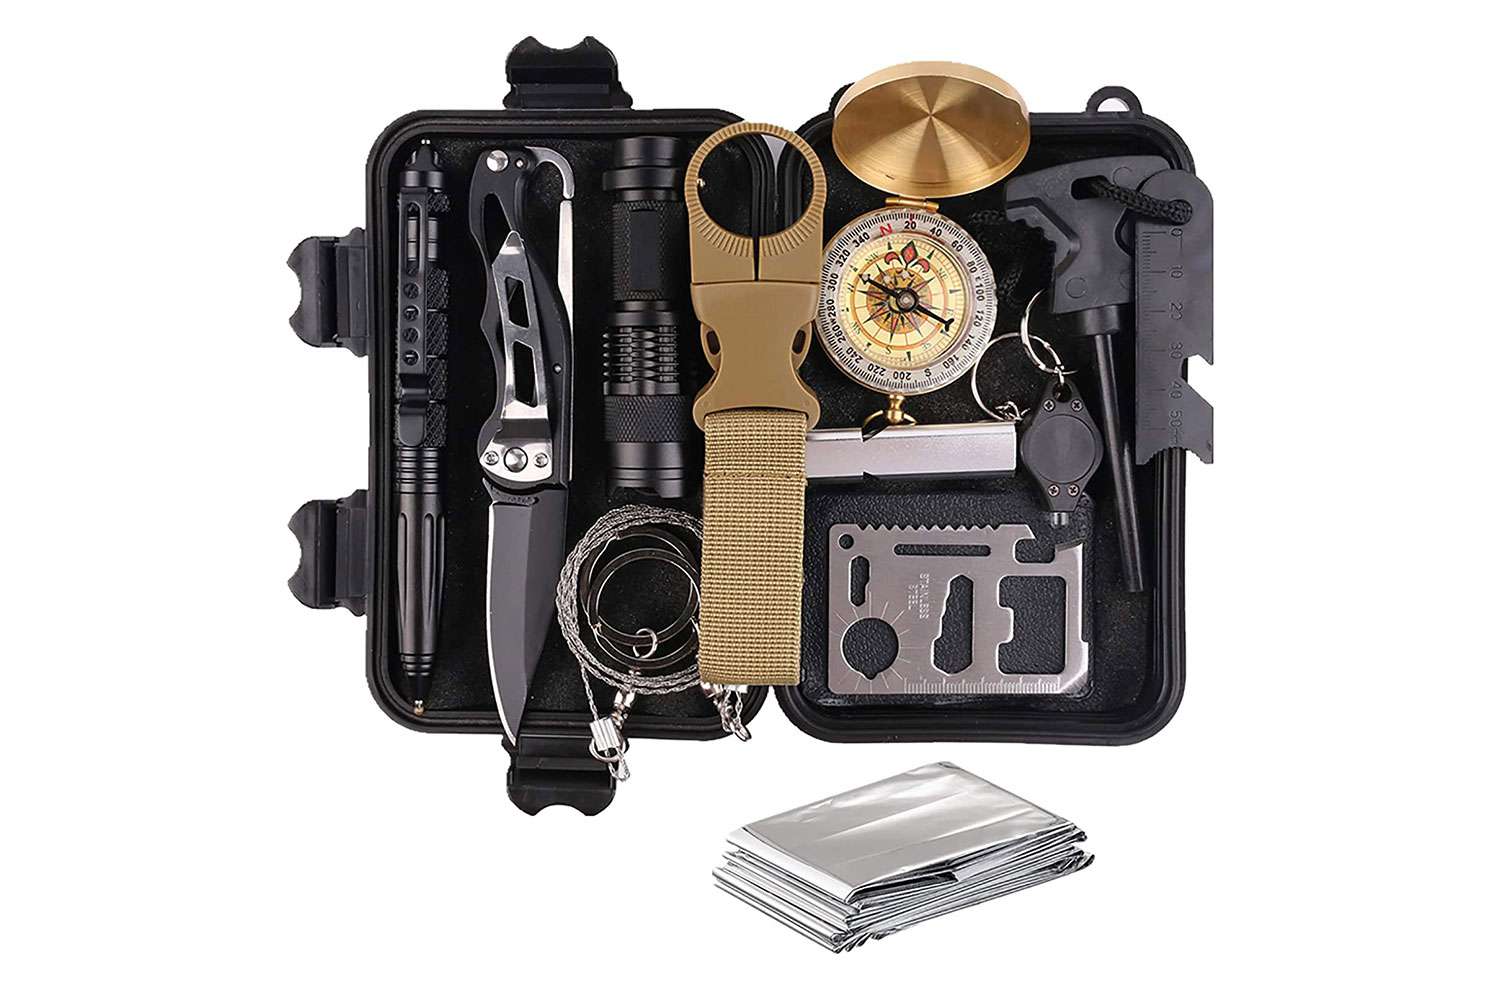 Survival Kit Gifts For Men Husband Dad Emergency Survival Gear And Equipment 14 In 1 Hunting Fishing Fathers Day Birthday Gift Ideas For Him Boyfriend 01d24b995b6548c09b3f1d369dce0577 